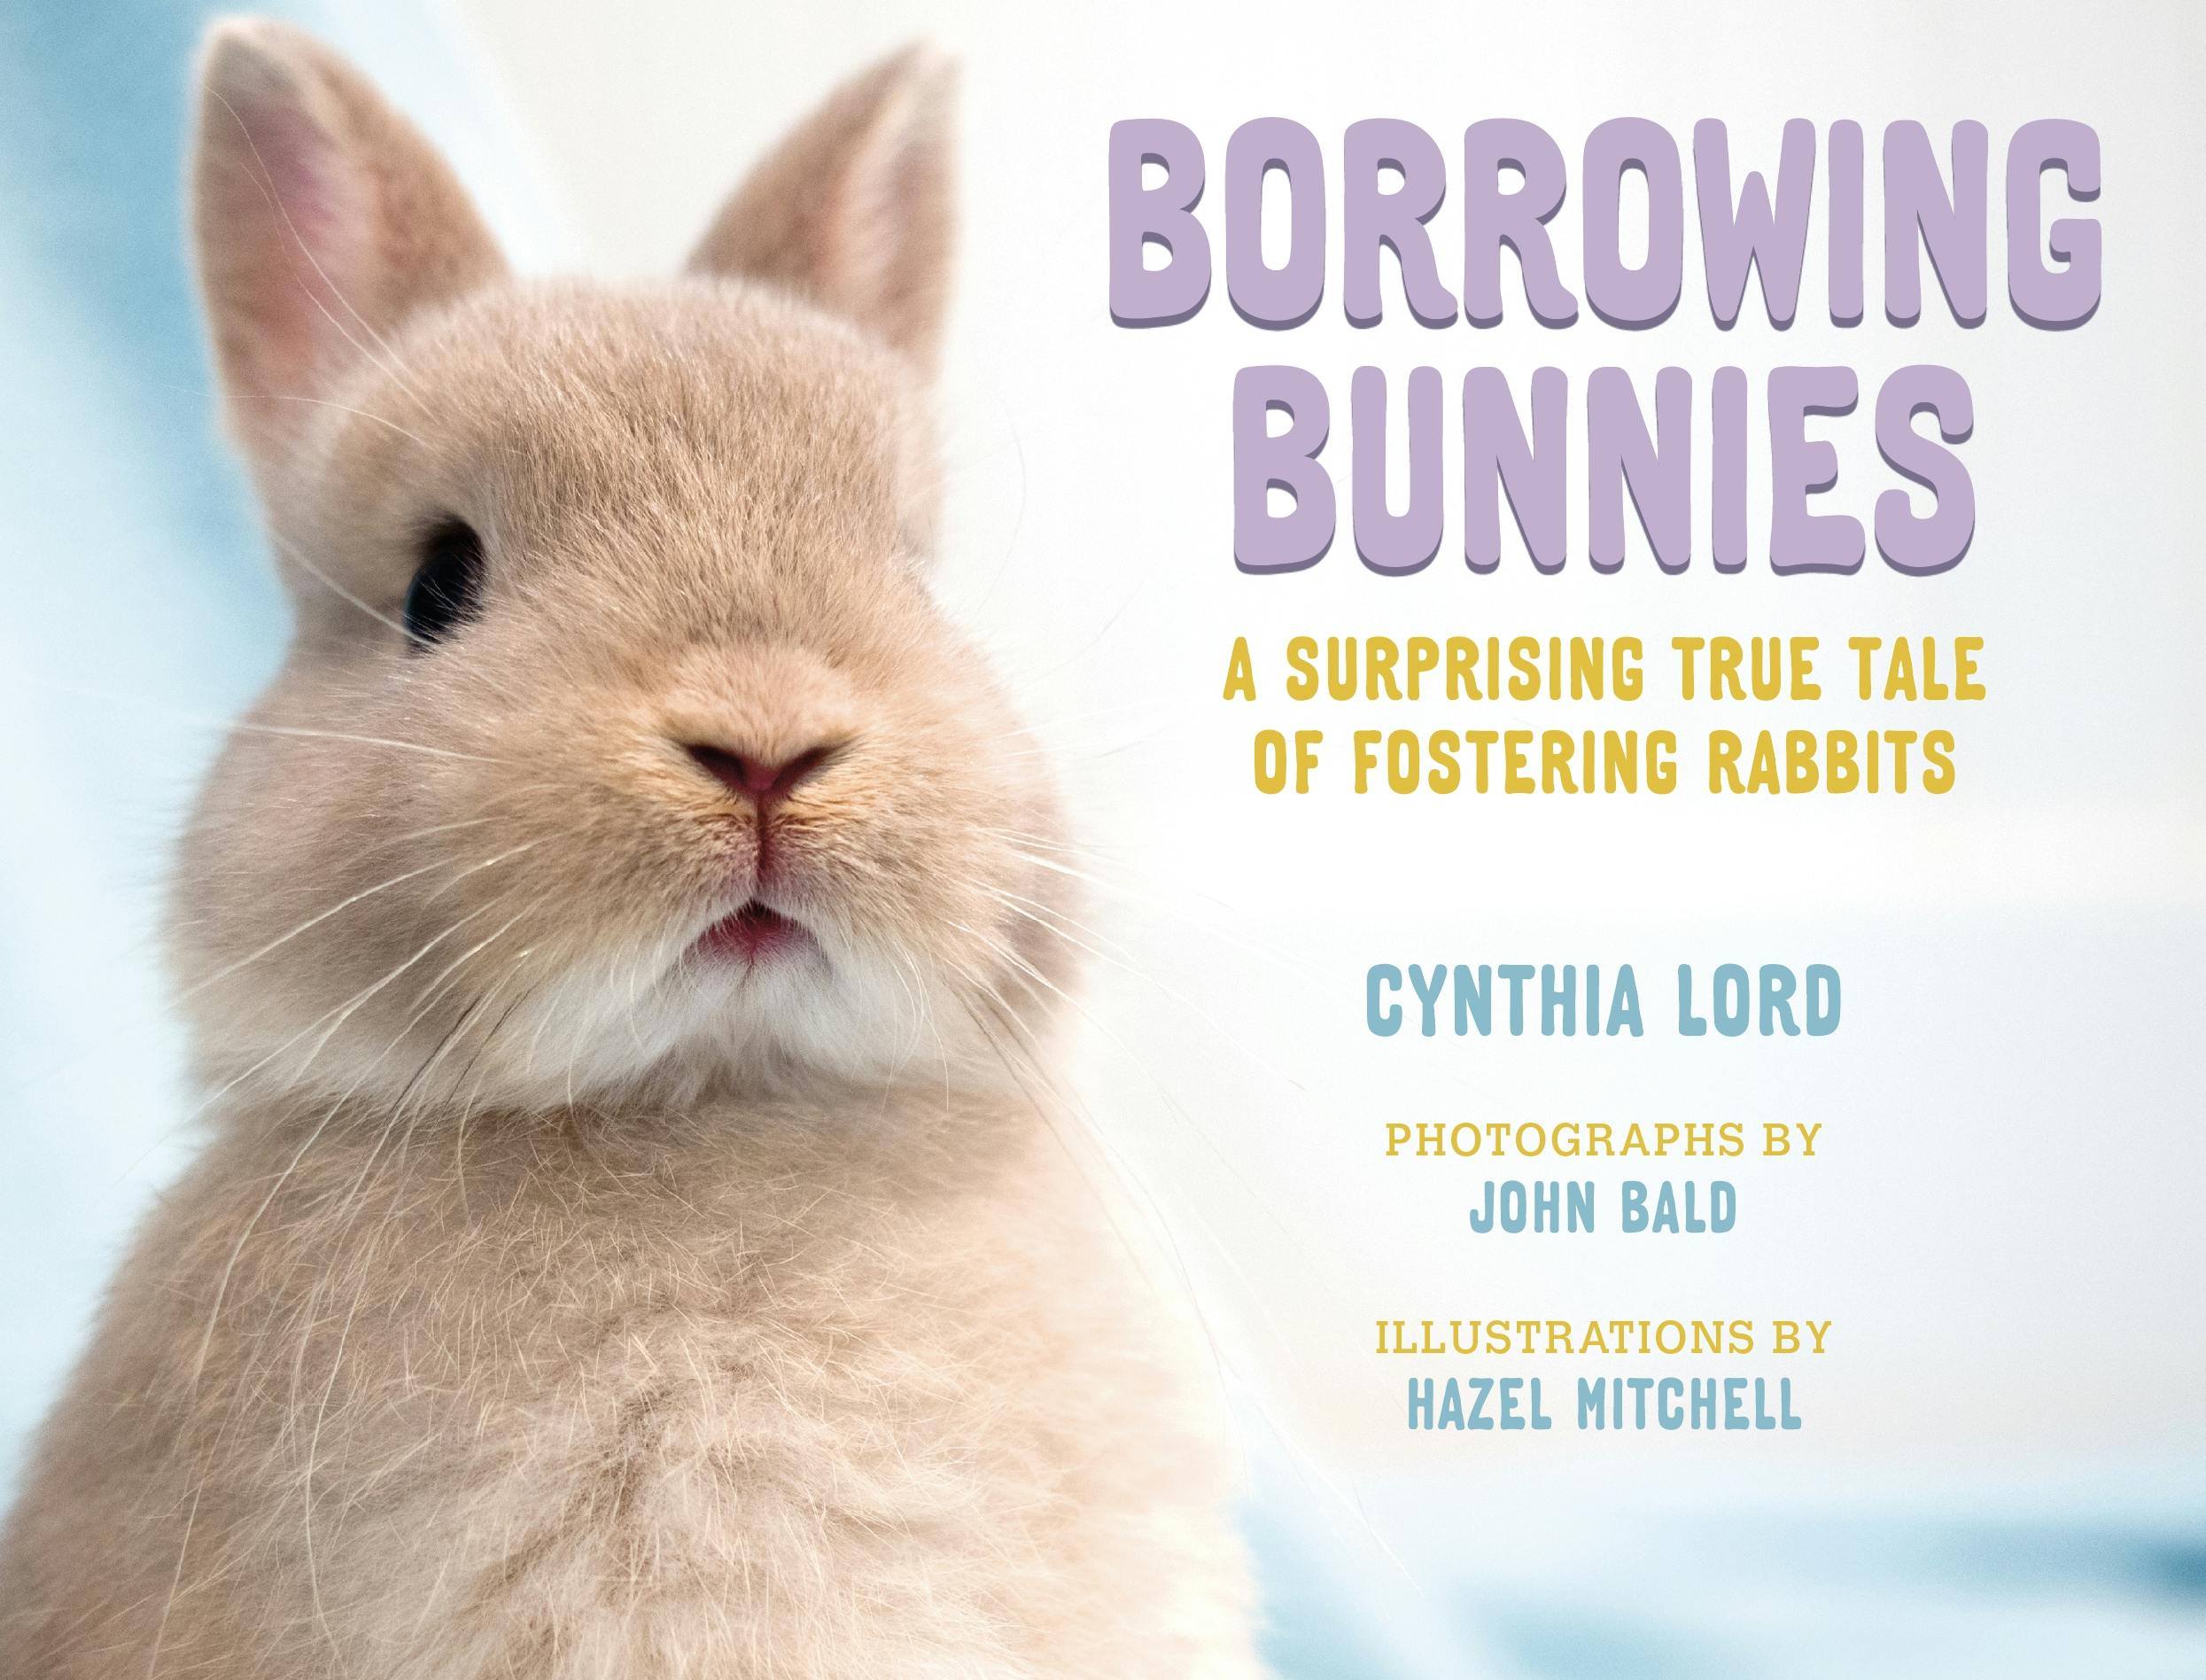 Return Rabbit x Honeylove: How have you benefited from returns